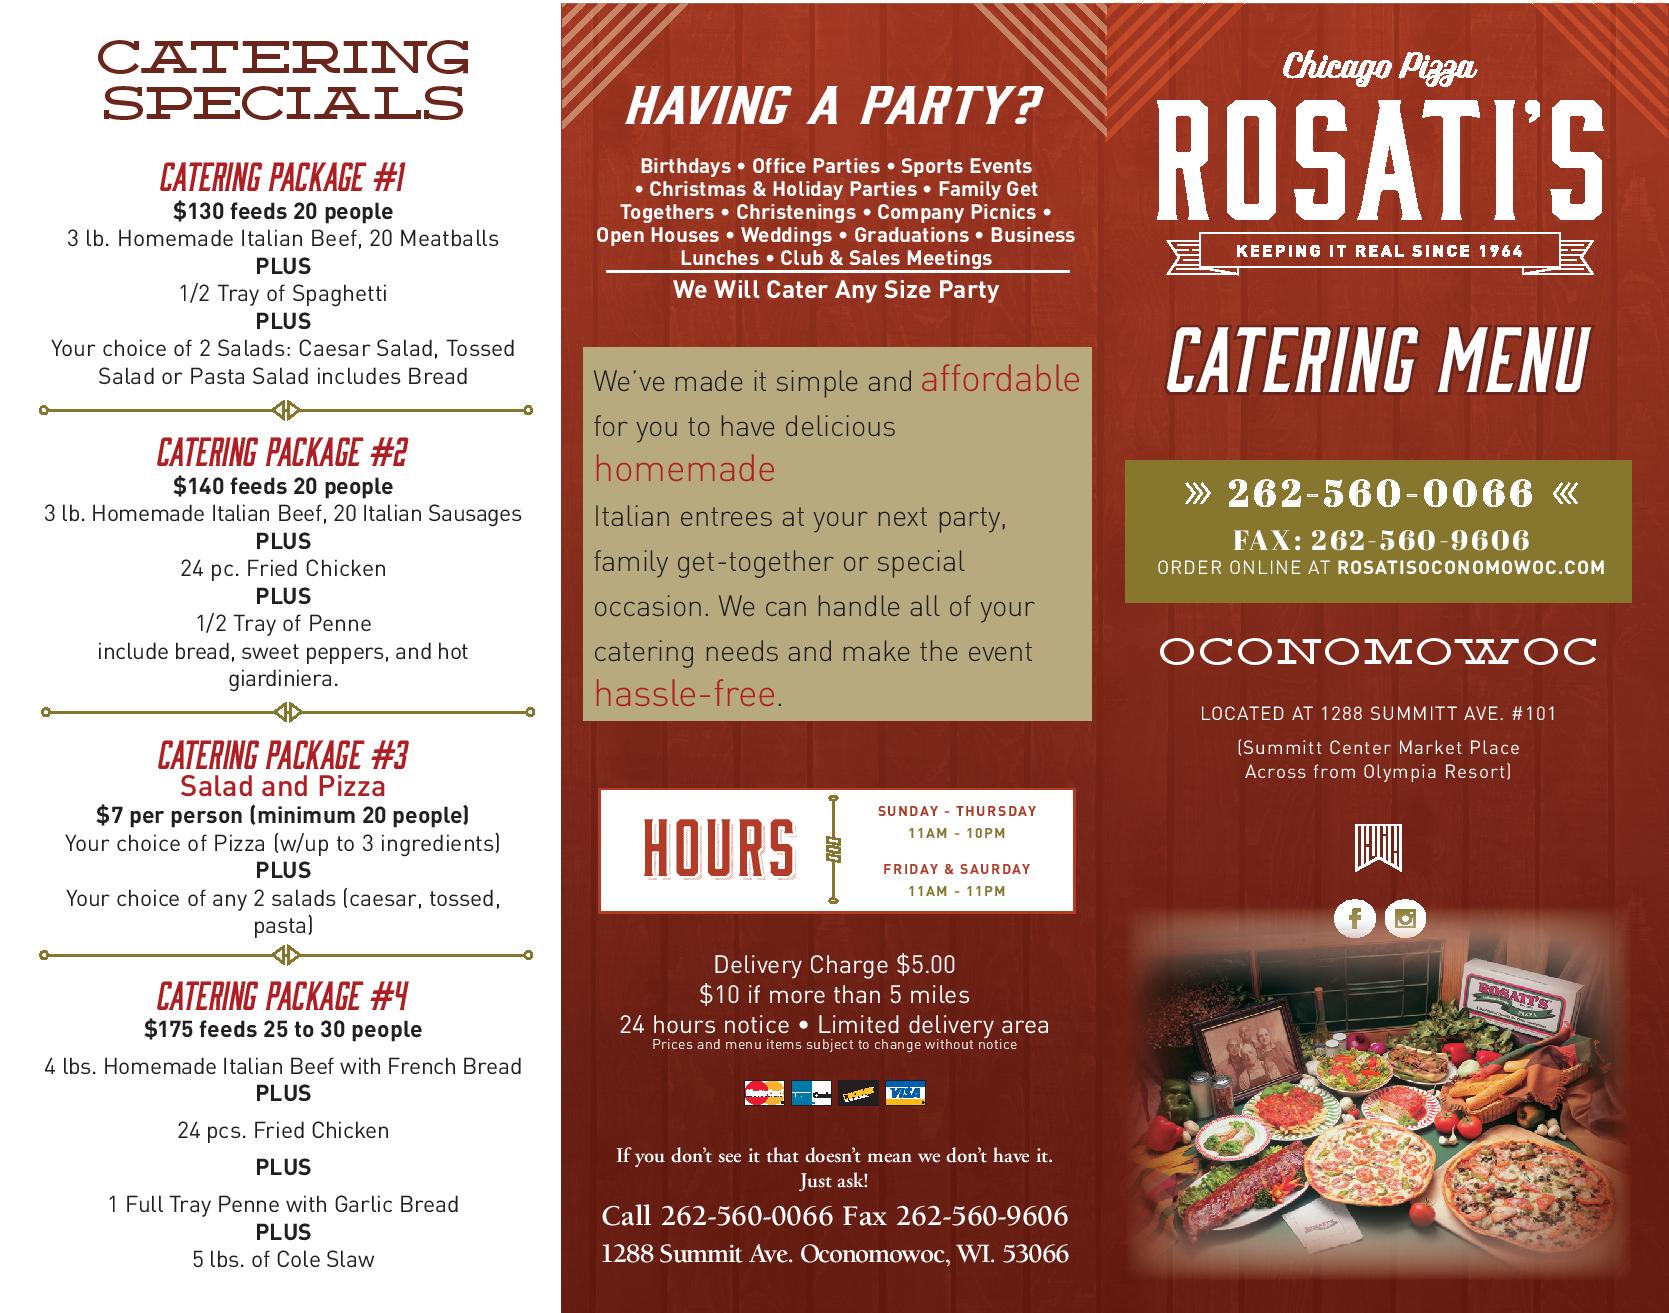 Catering Chicago Style Food Oconomowoc WI